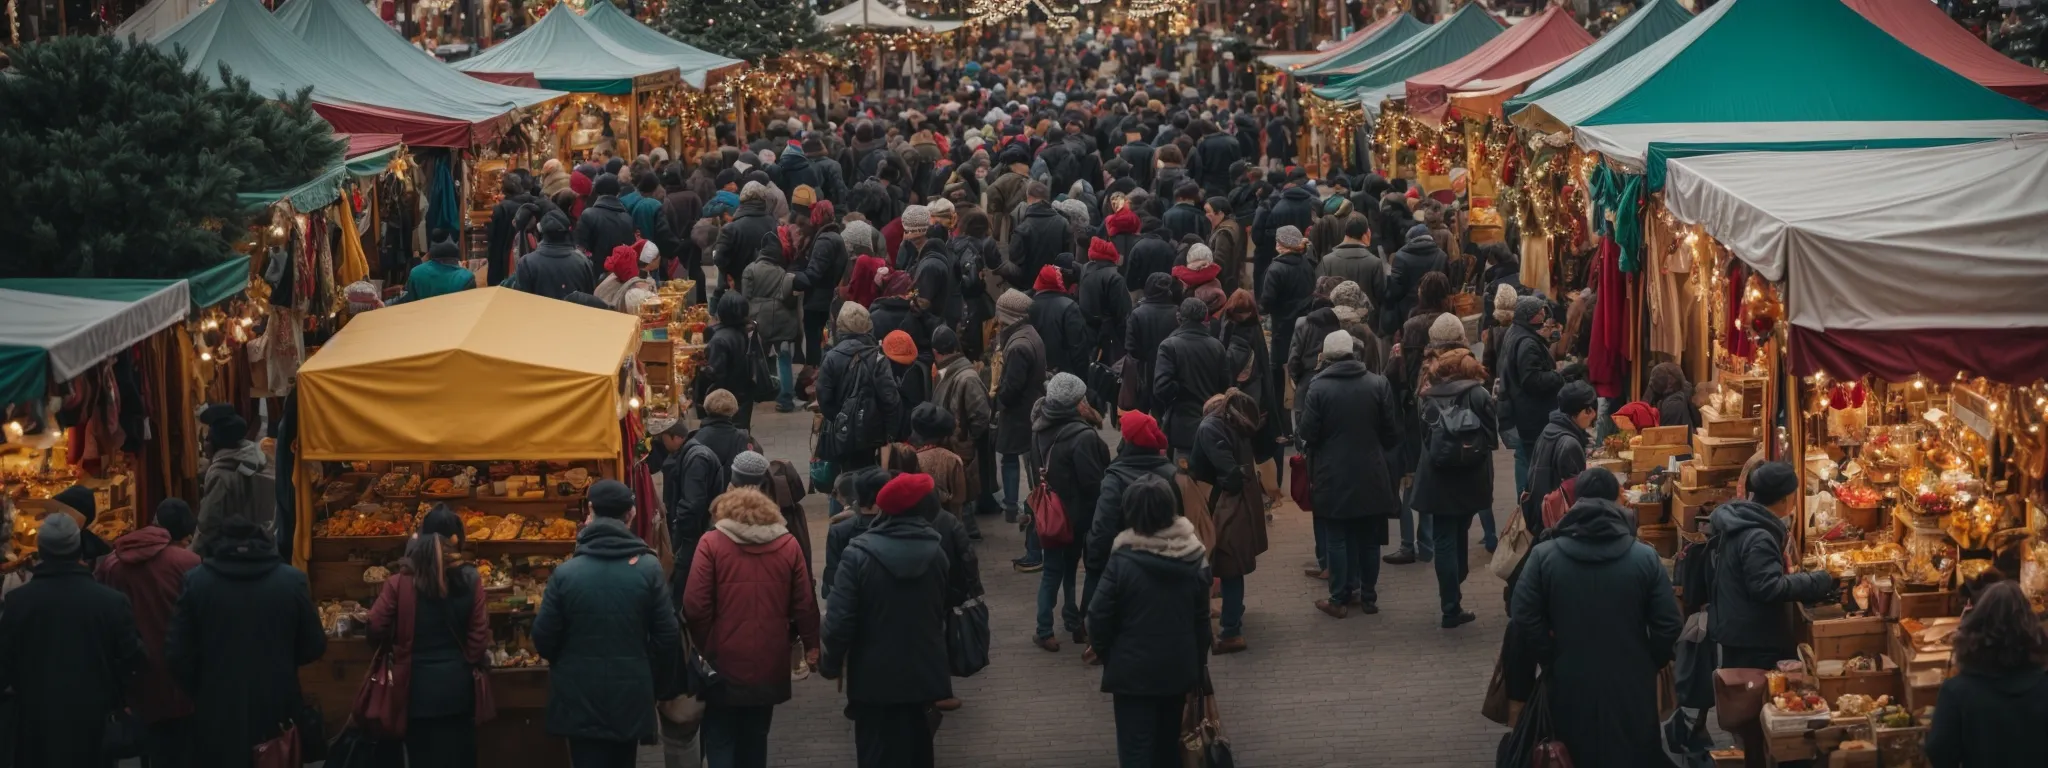 a bustling holiday market with distinctive, colorful stalls offering unique gift items.